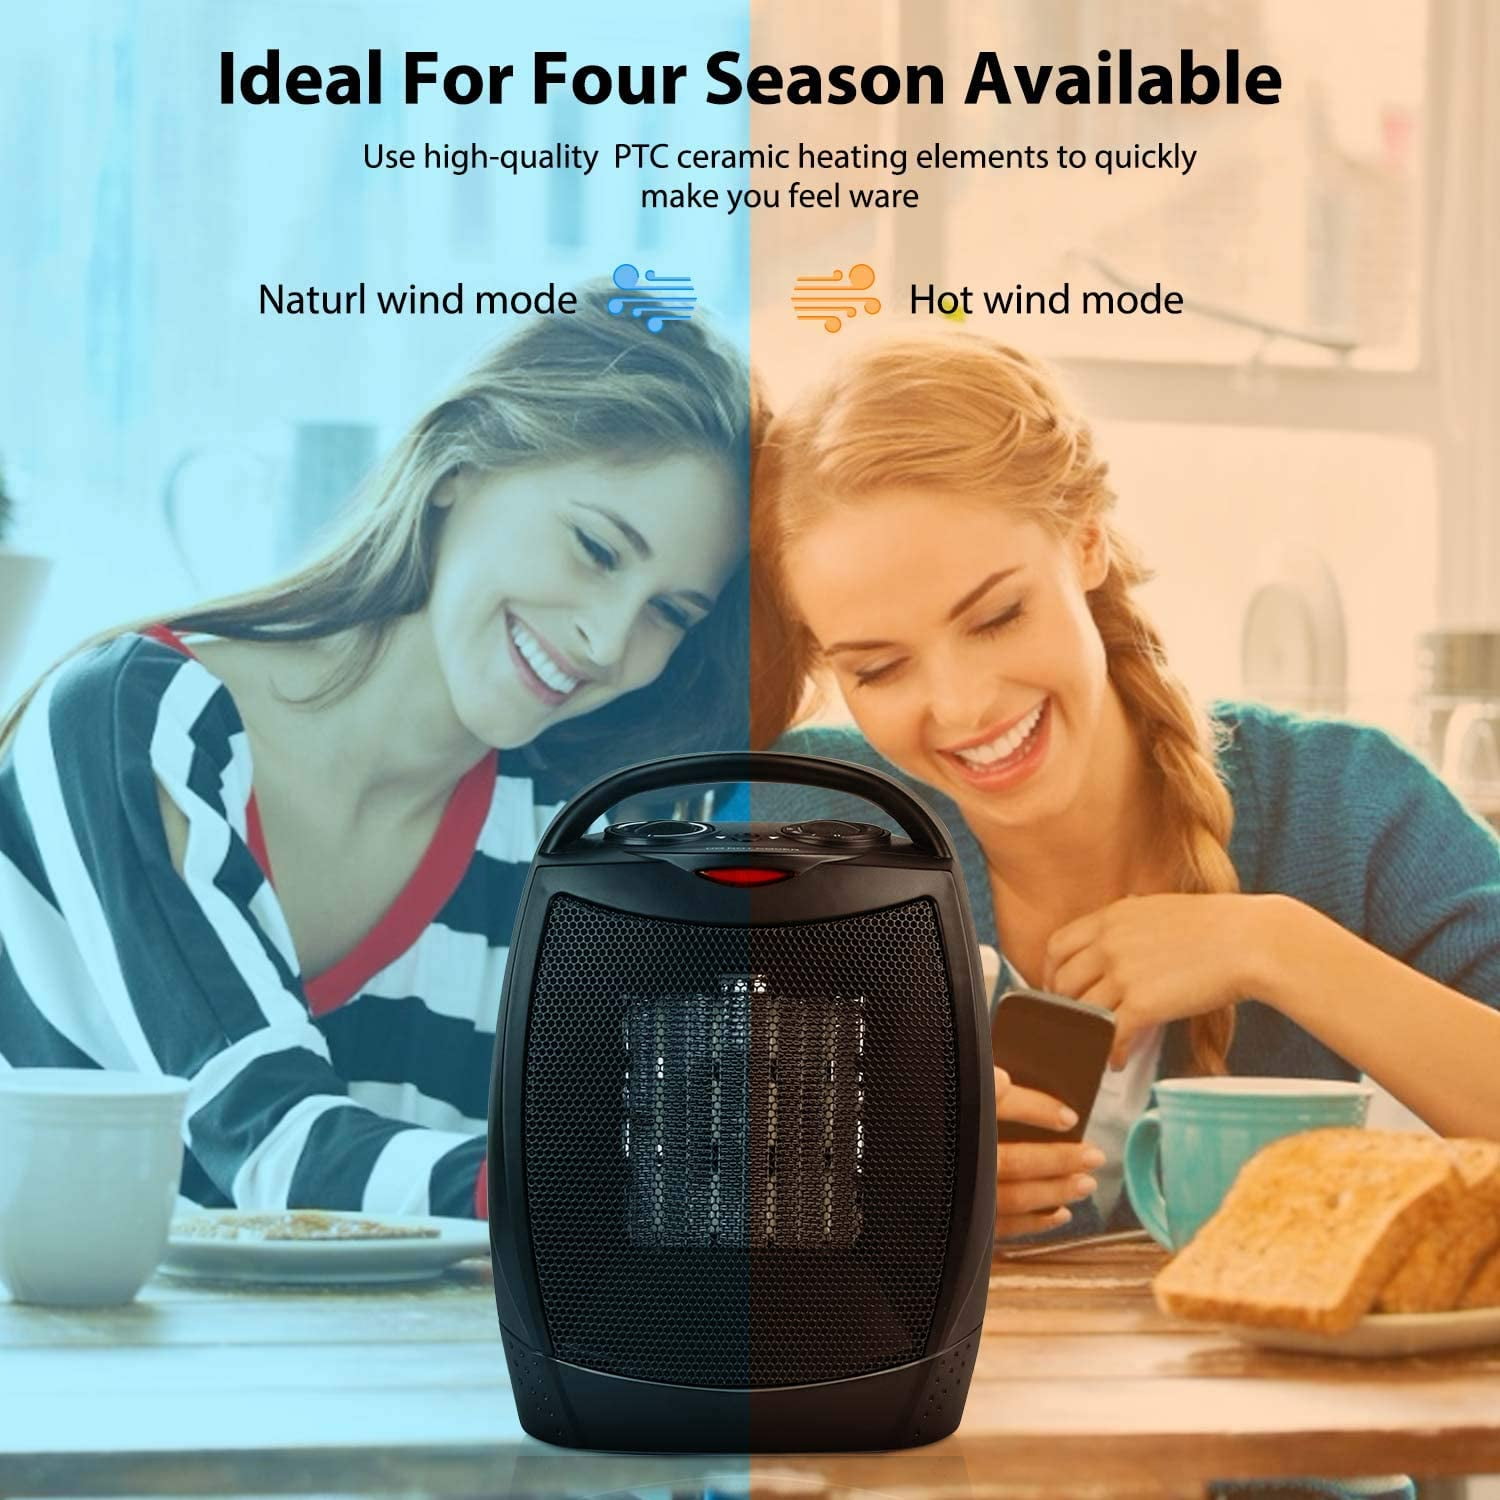 Ft in Minutes Portable Electric Space Heater 1500W/750W Oscillating Ceramic Heater with Thermostat Heat Up 200 sq Black Safe & Quiet for Office Home Room Desk Indoor Use 